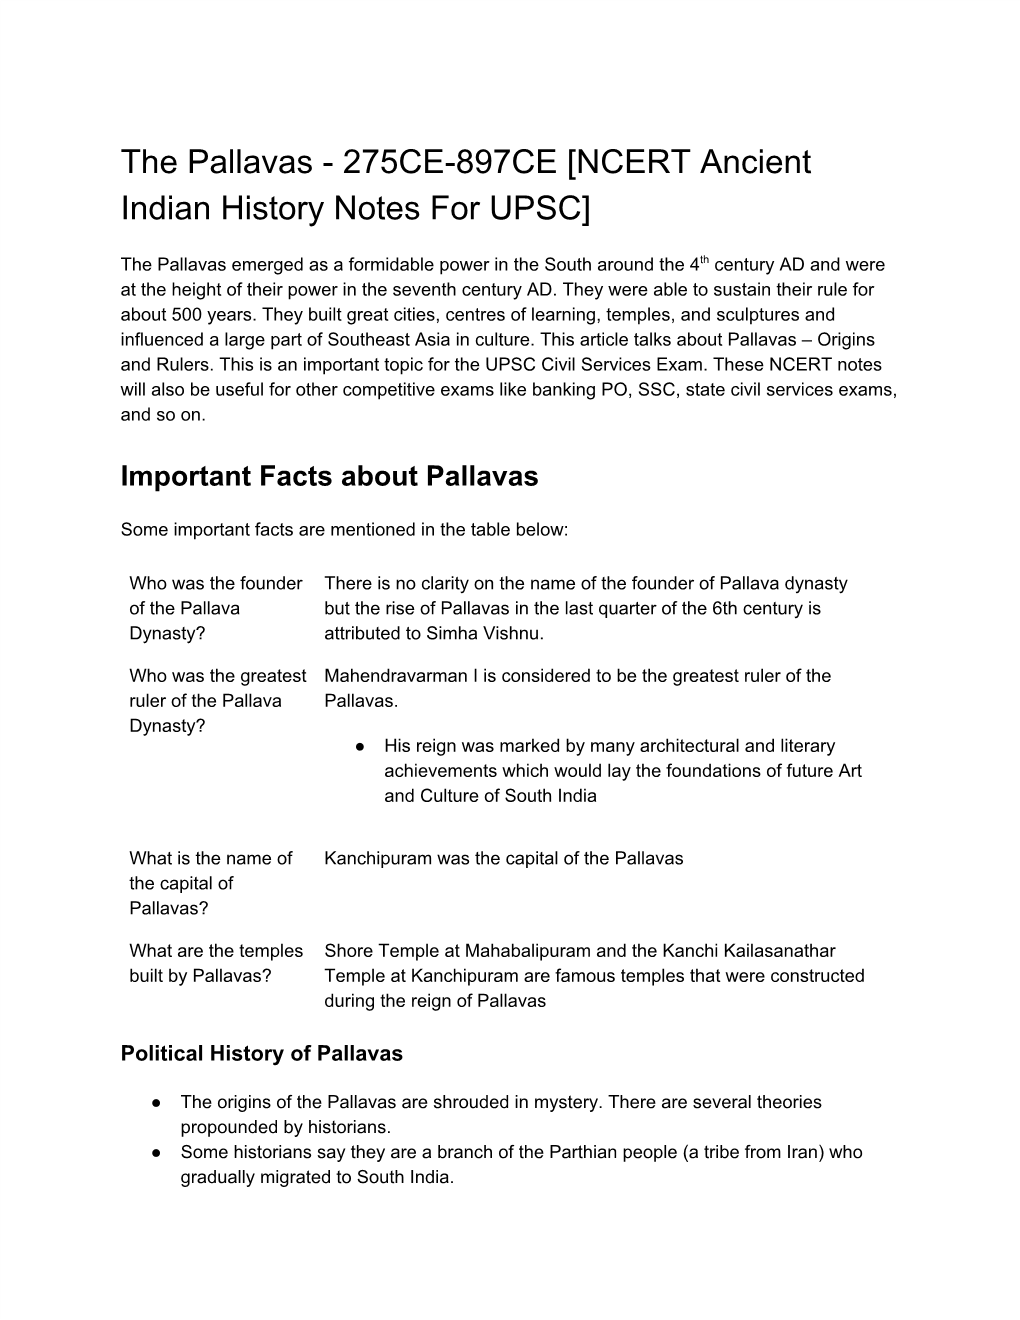 The Pallavas - 275CE-897CE [NCERT Ancient Indian History Notes for UPSC]